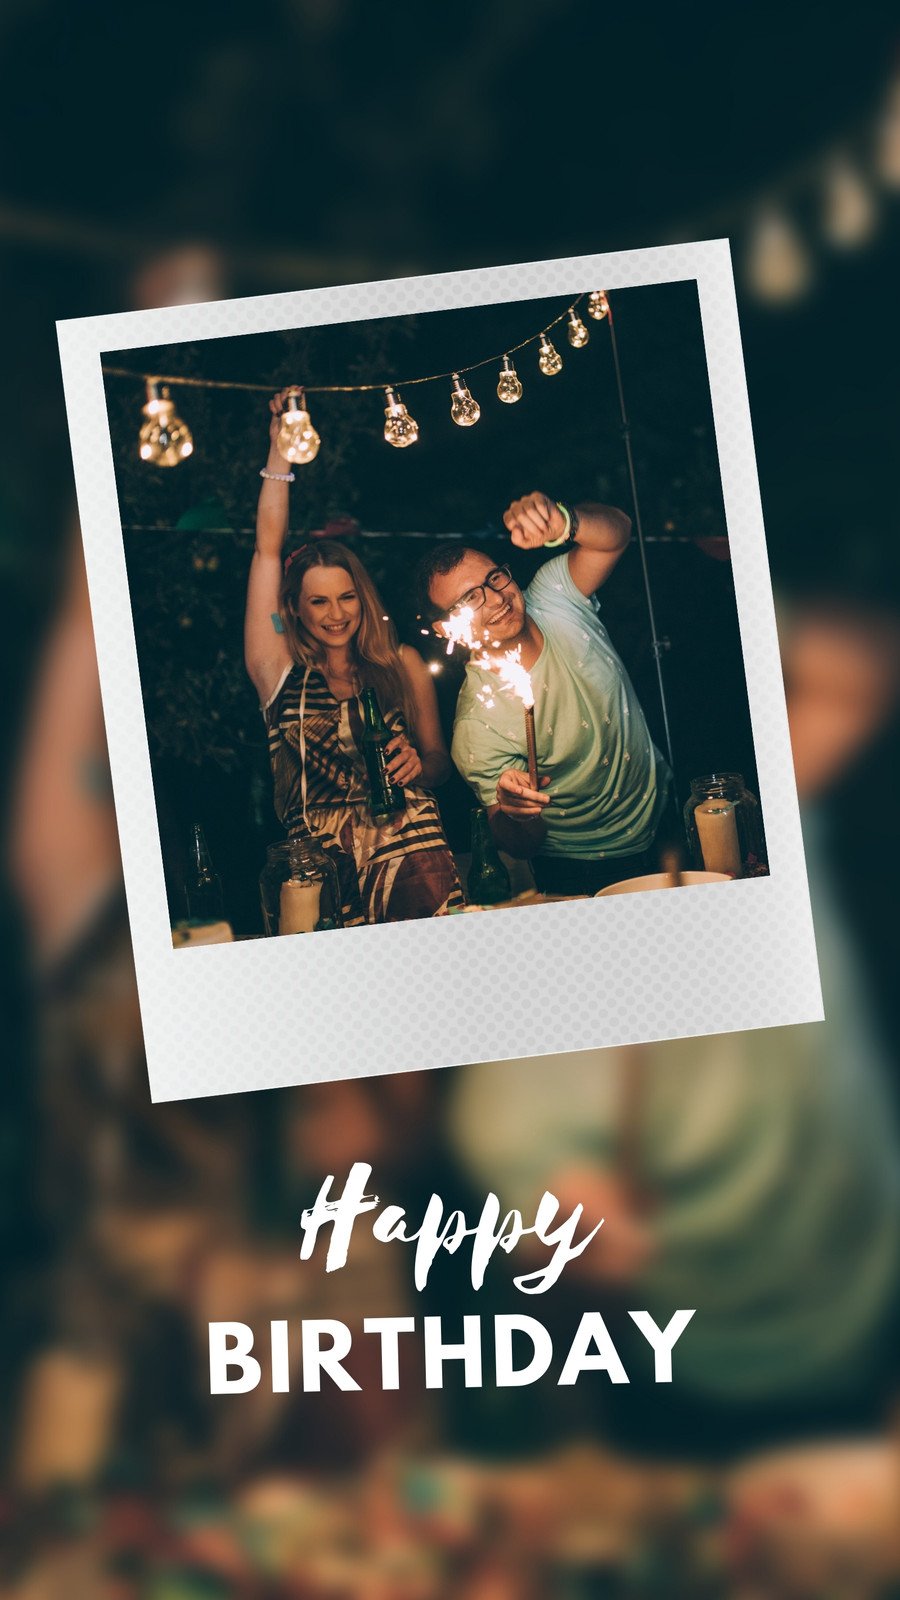 Cute Instagram Happy Birthday Stories Celebrating Special Moments That Will Leave You Feeling